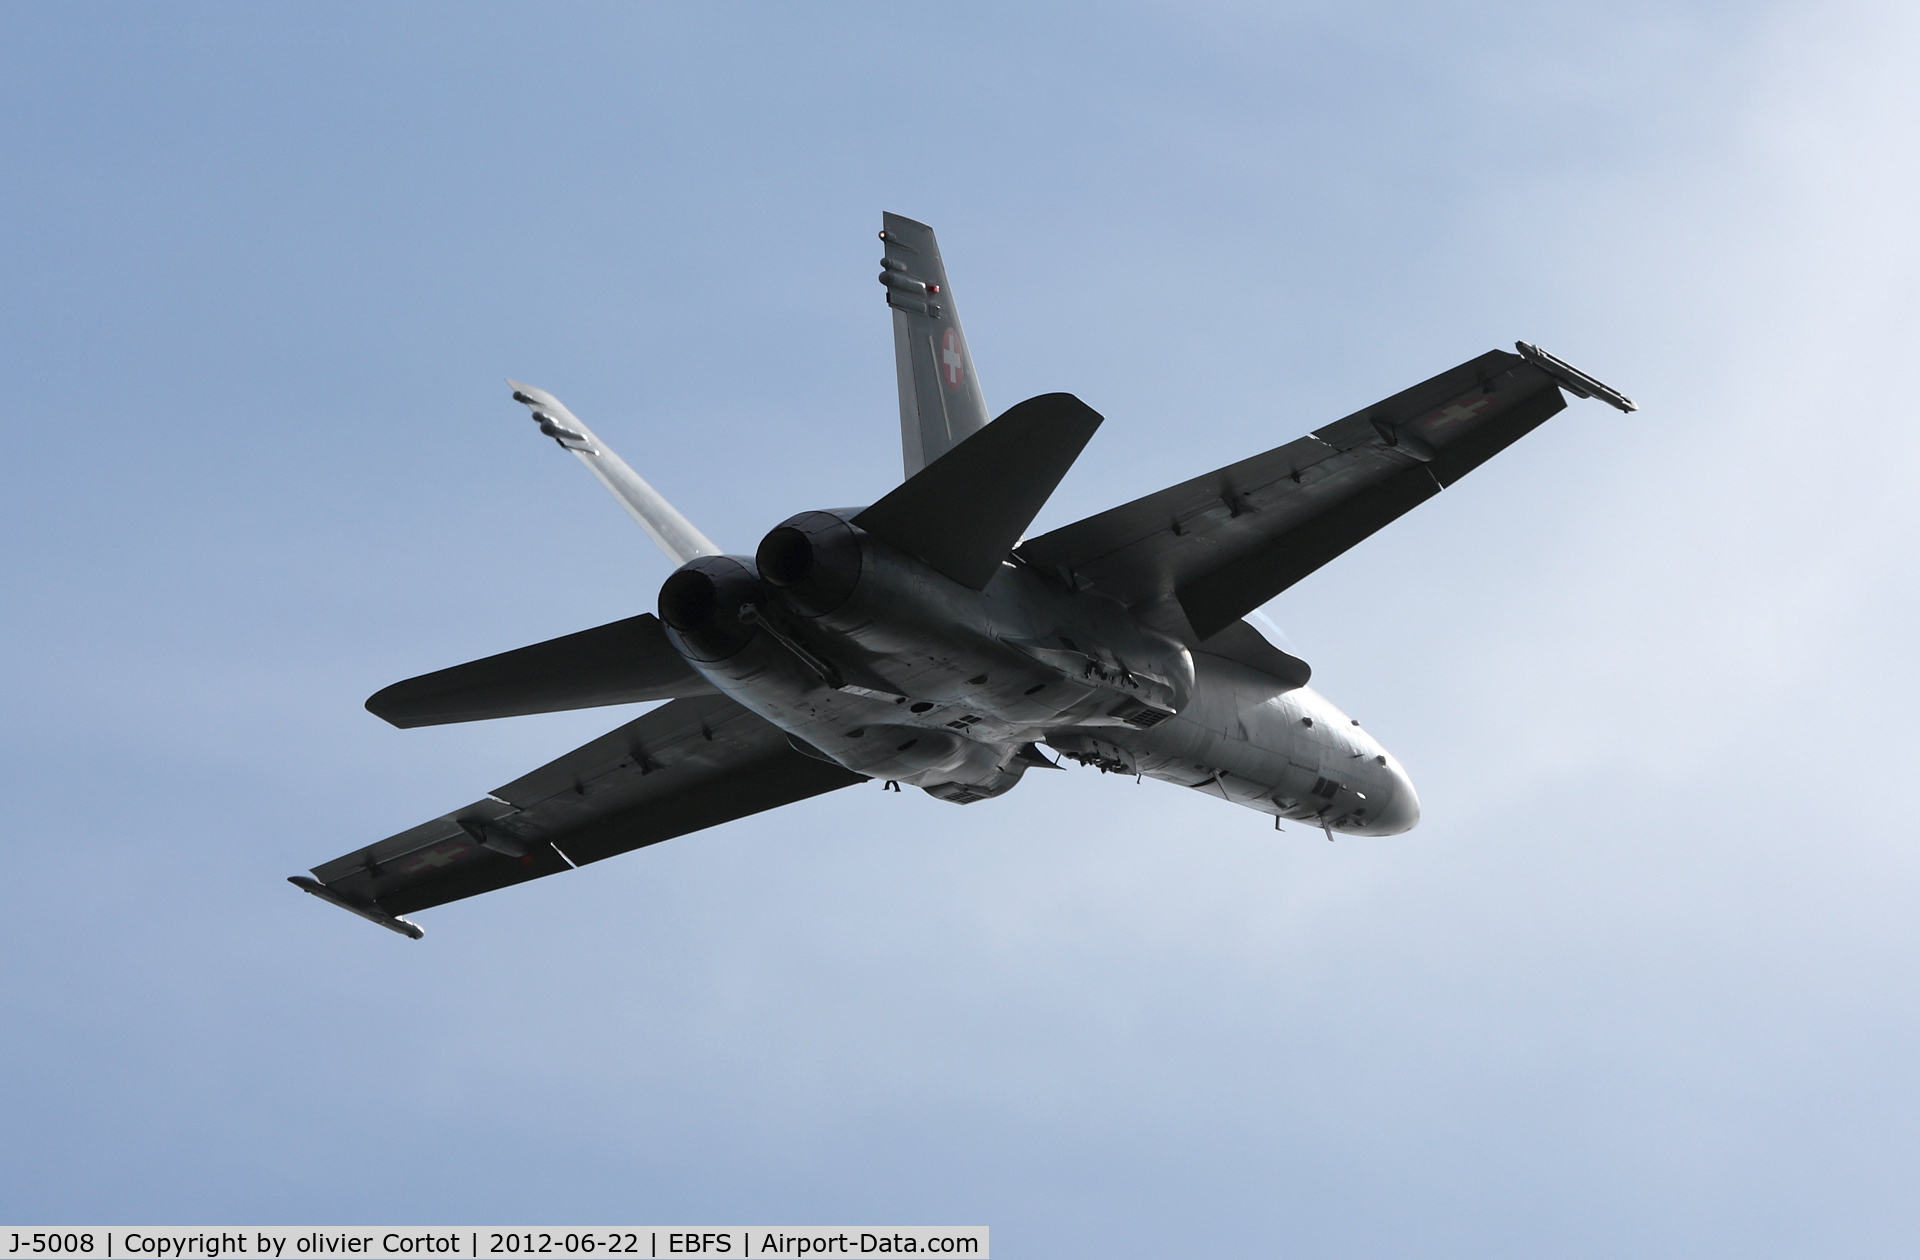 J-5008, McDonnell Douglas F/A-18C Hornet C/N 1336/SFC008, playing with the light